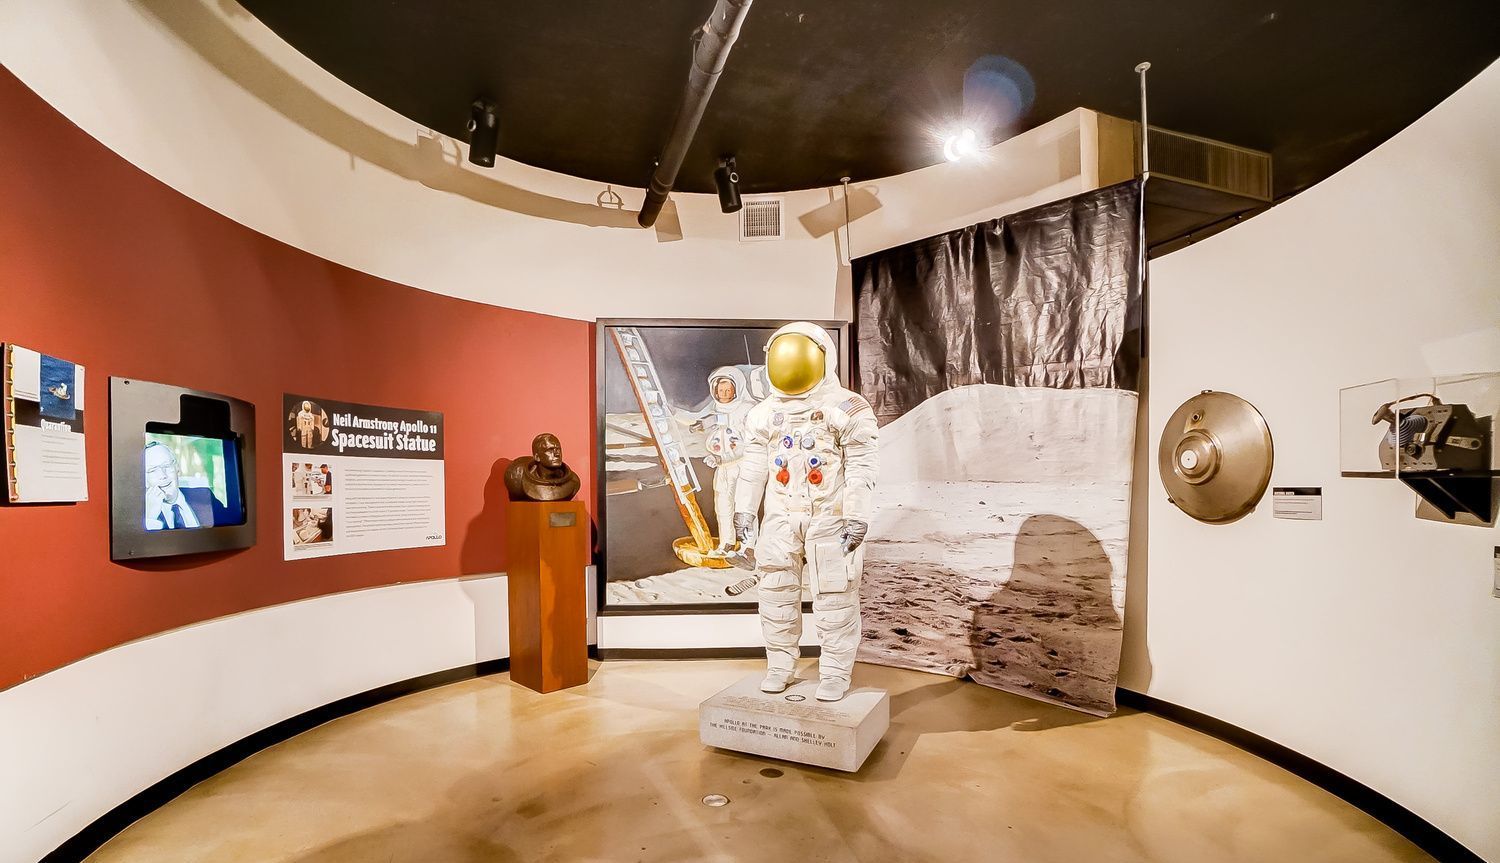 A room with a statue of an astronaut on display